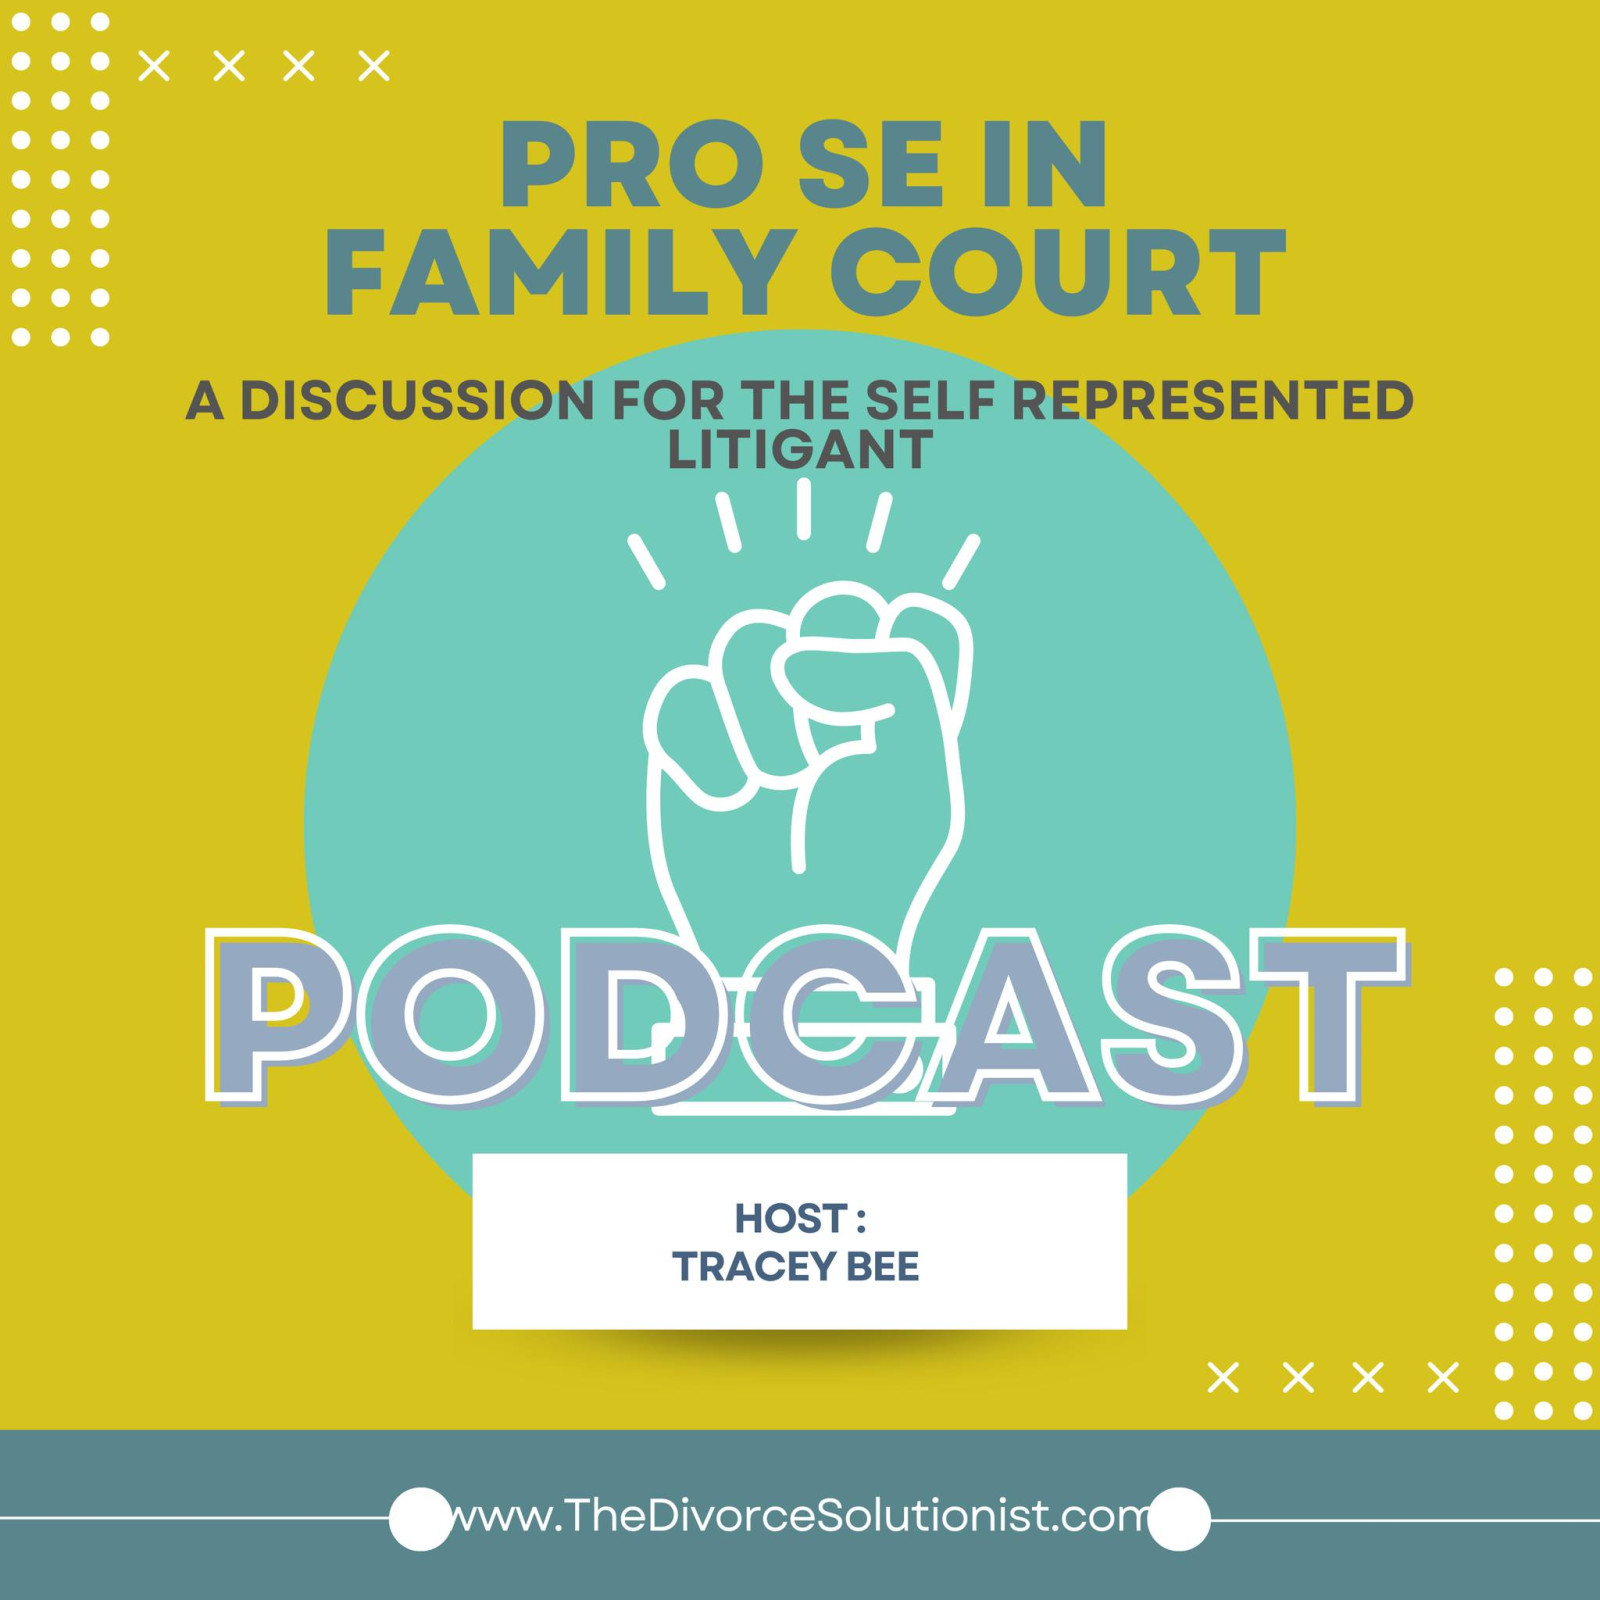 Episode 1: What's Wrong with Family Court